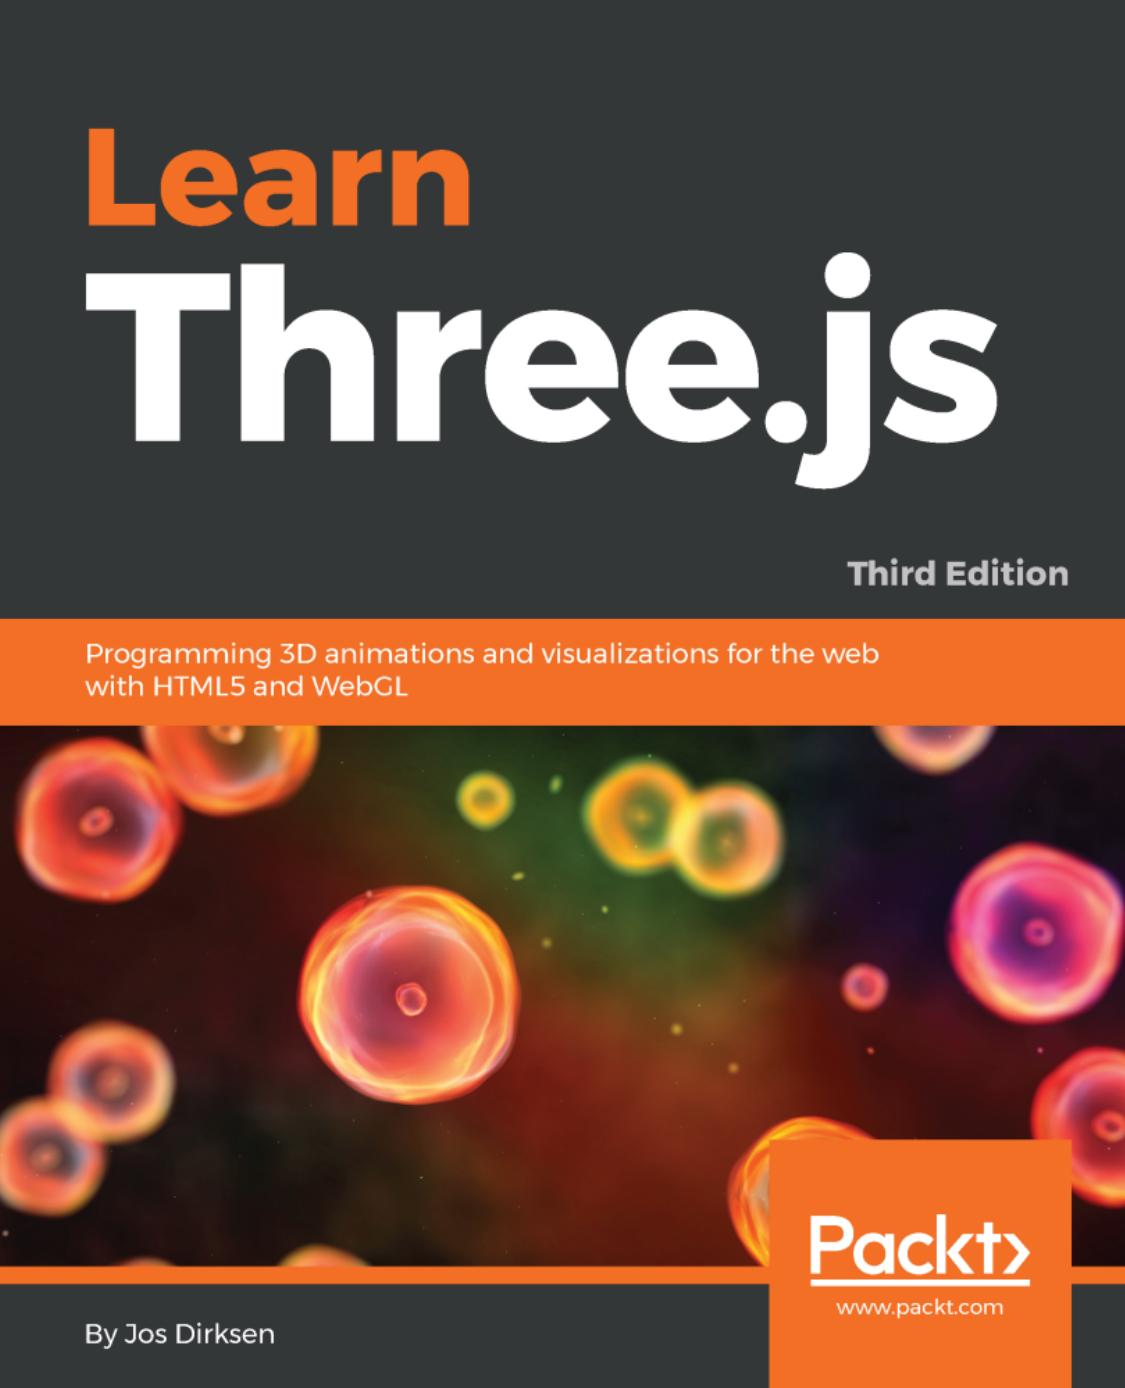 Learn Three. Js: Programming 3D Animations and Visualizations for the Web With HTML5 and WebGL, 3rd Edition